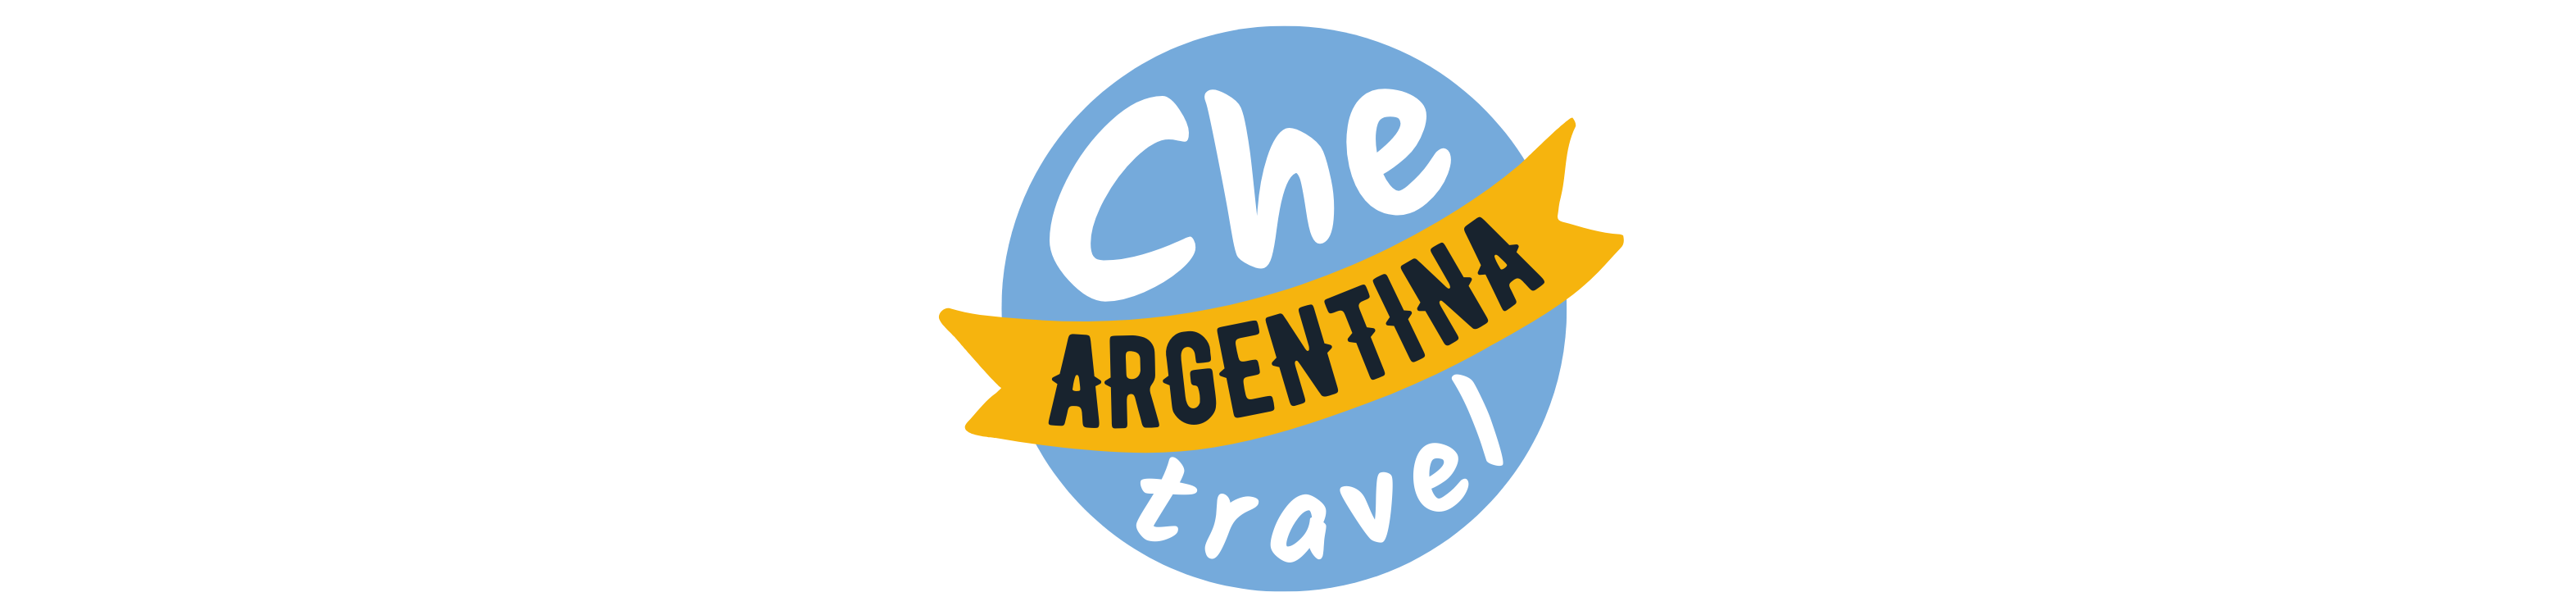 Che Argentina Travel - Plan Your Trip to Argentina!